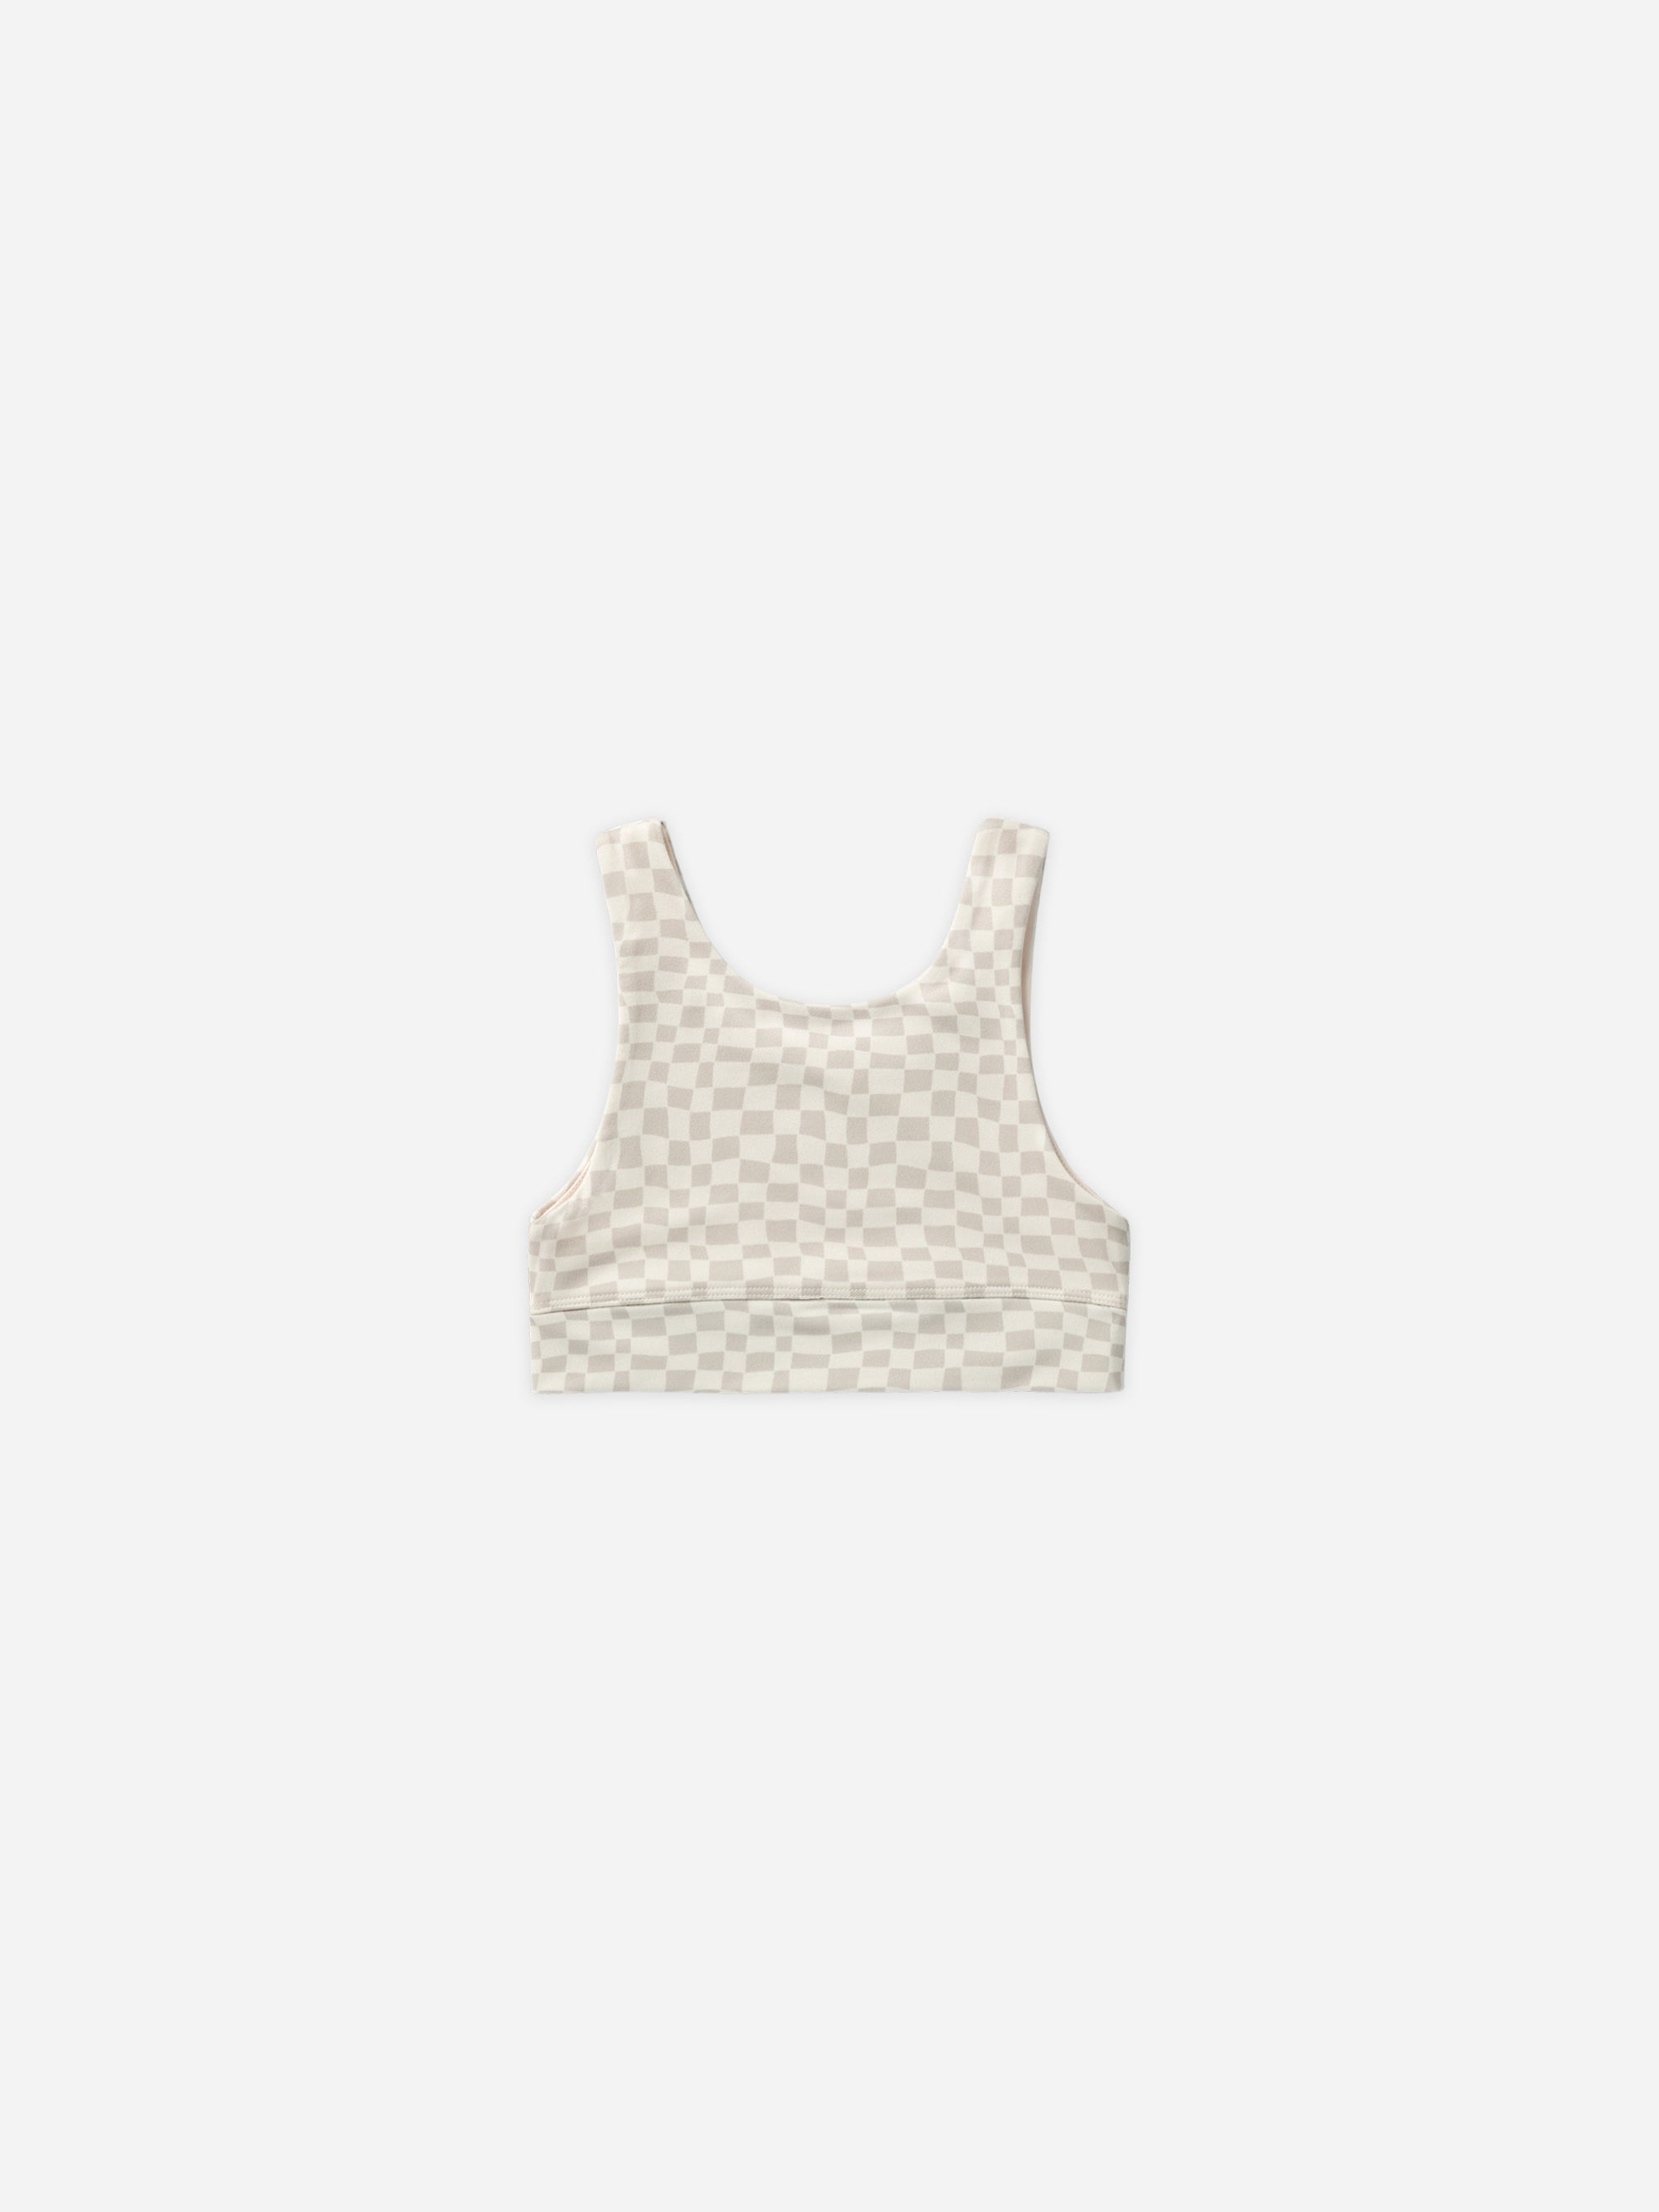 Swift Sports Bra || Dove Check - Rylee + Cru | Kids Clothes | Trendy Baby Clothes | Modern Infant Outfits |